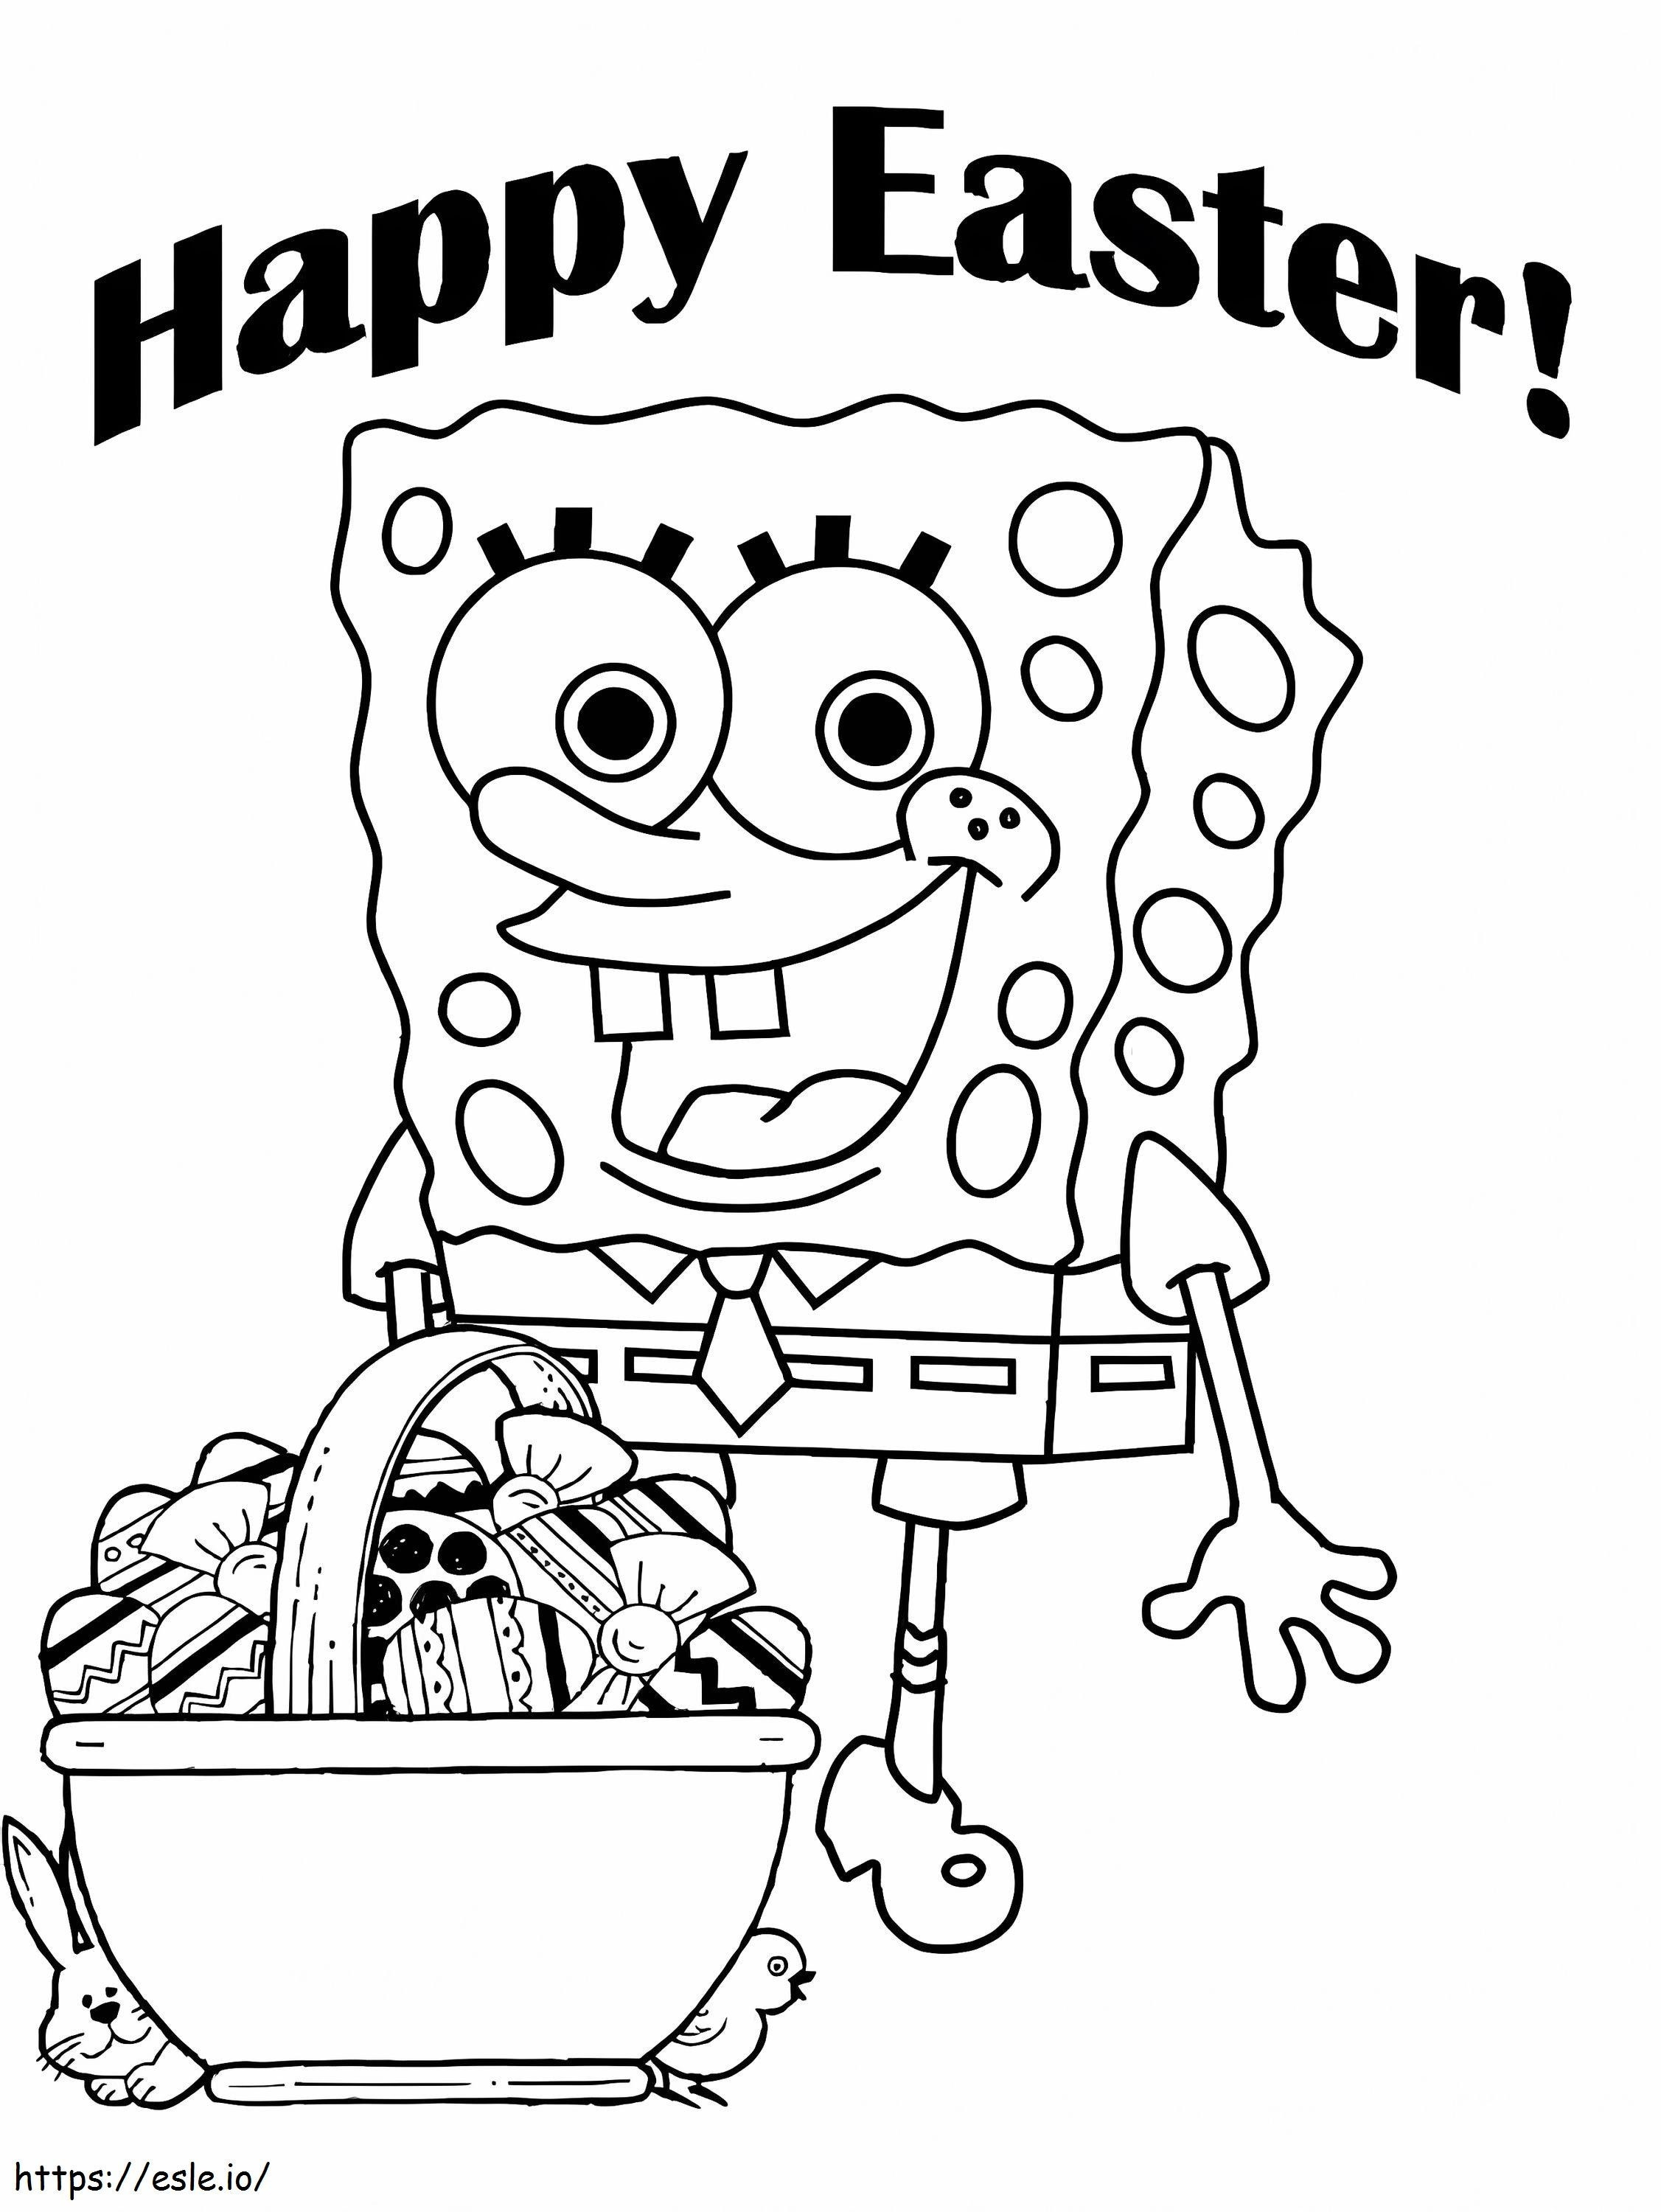 Spongebob And Easter Eggs coloring page